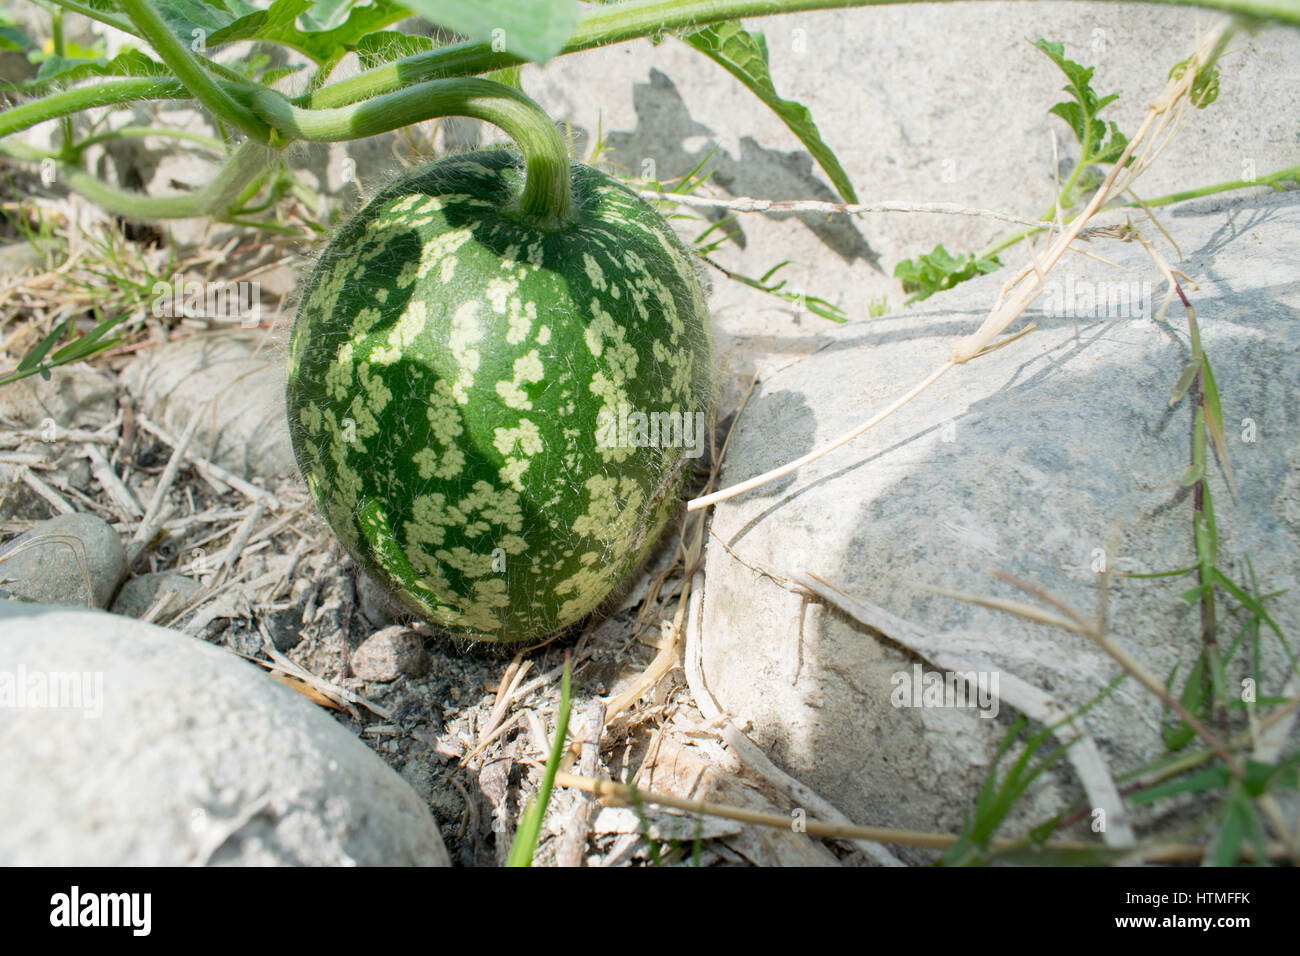 a baby watermelon found at the river in Istan, Spain Stock Photo